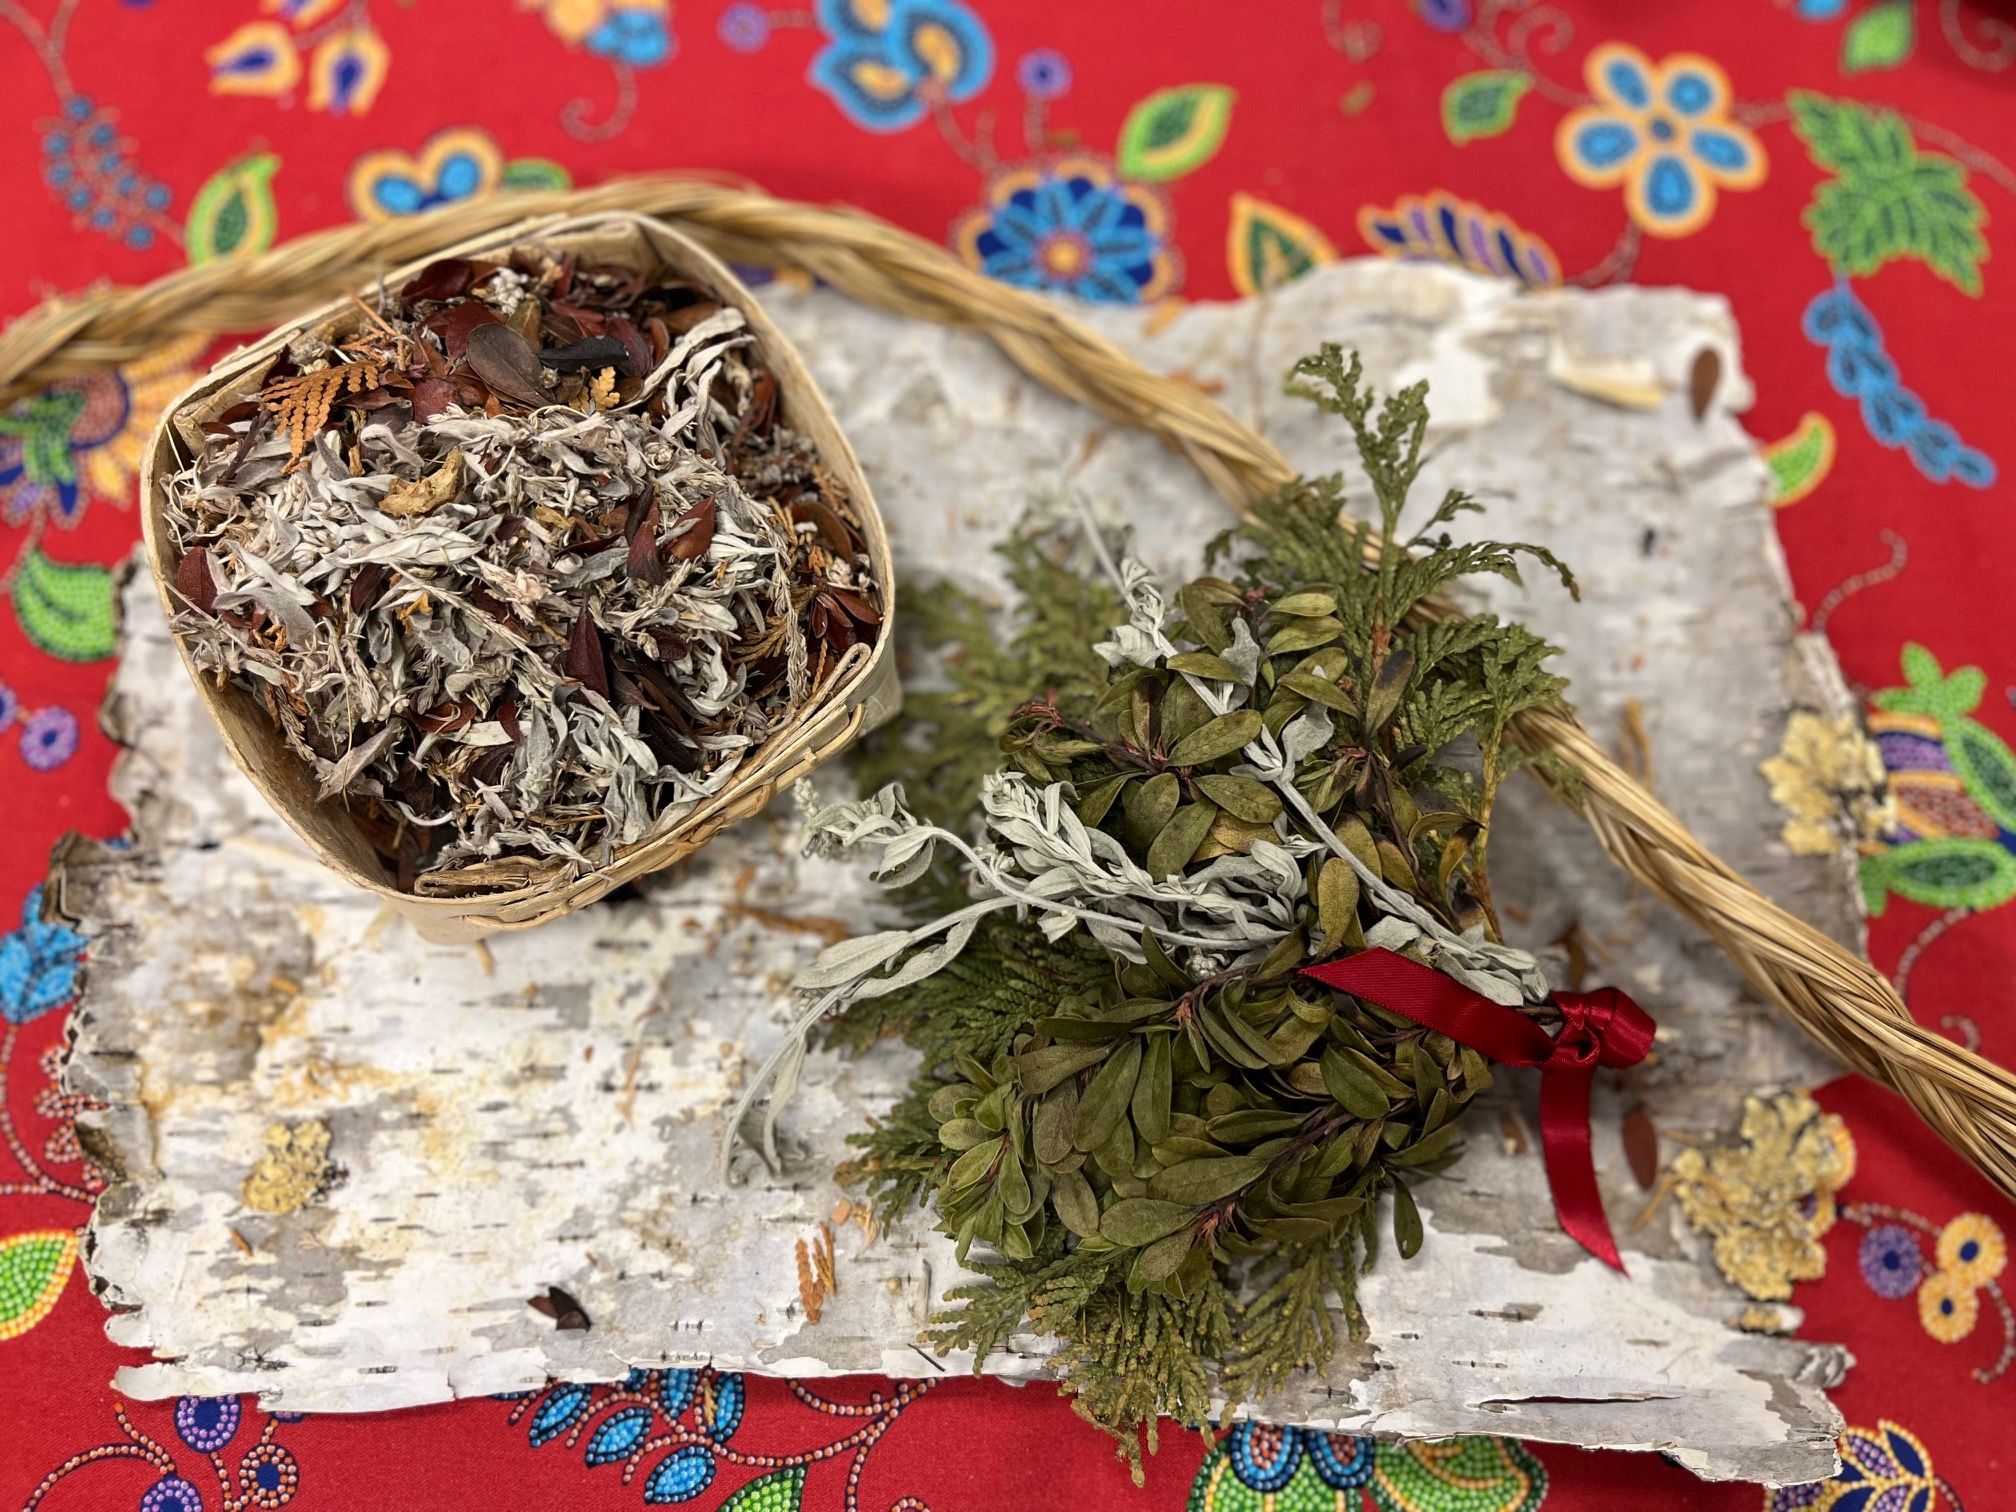 Traditional Indigenous medicines laid out on a patterned cloth.